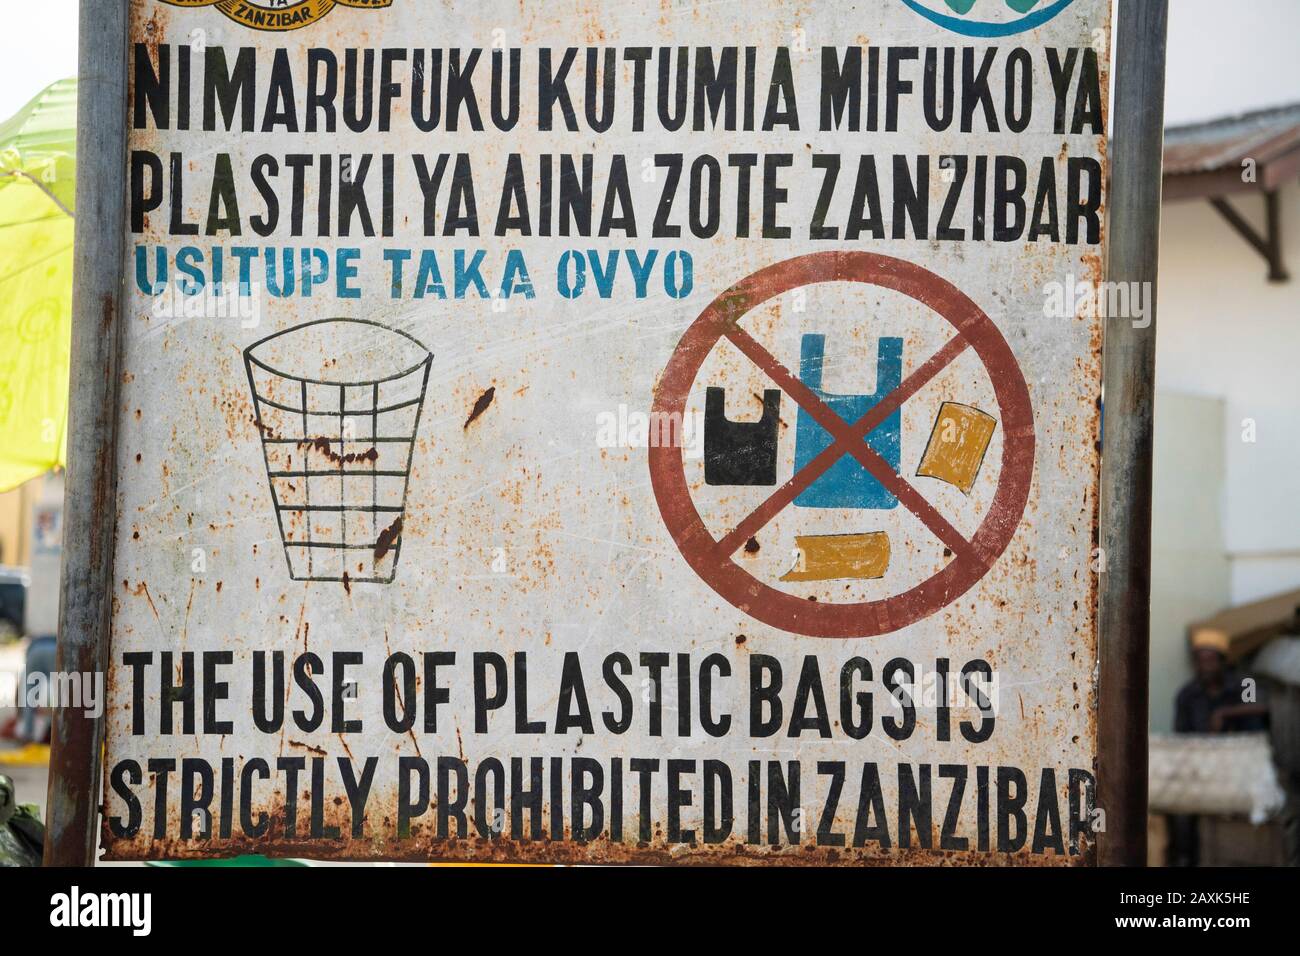 Tanzania bans the use of plastic bags